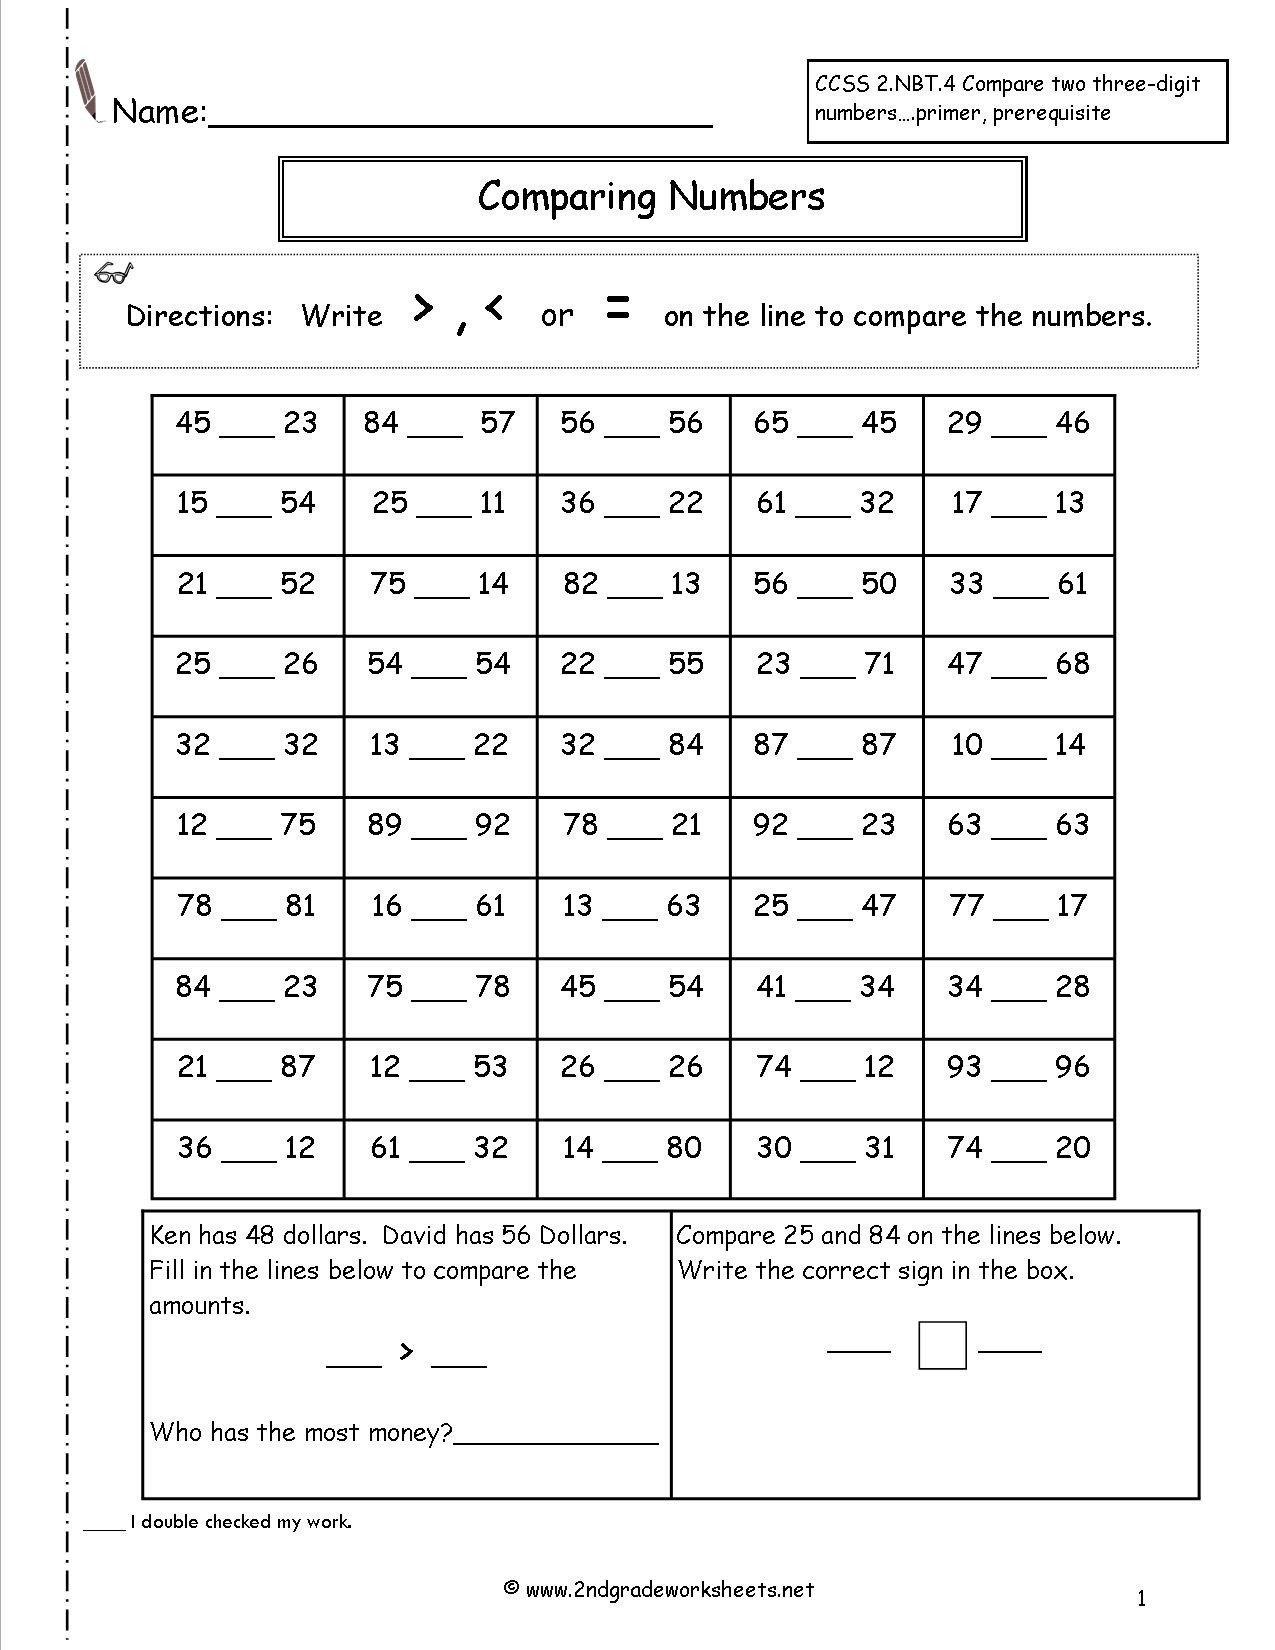 comparing numbers worksheets 4th grade db excelcom